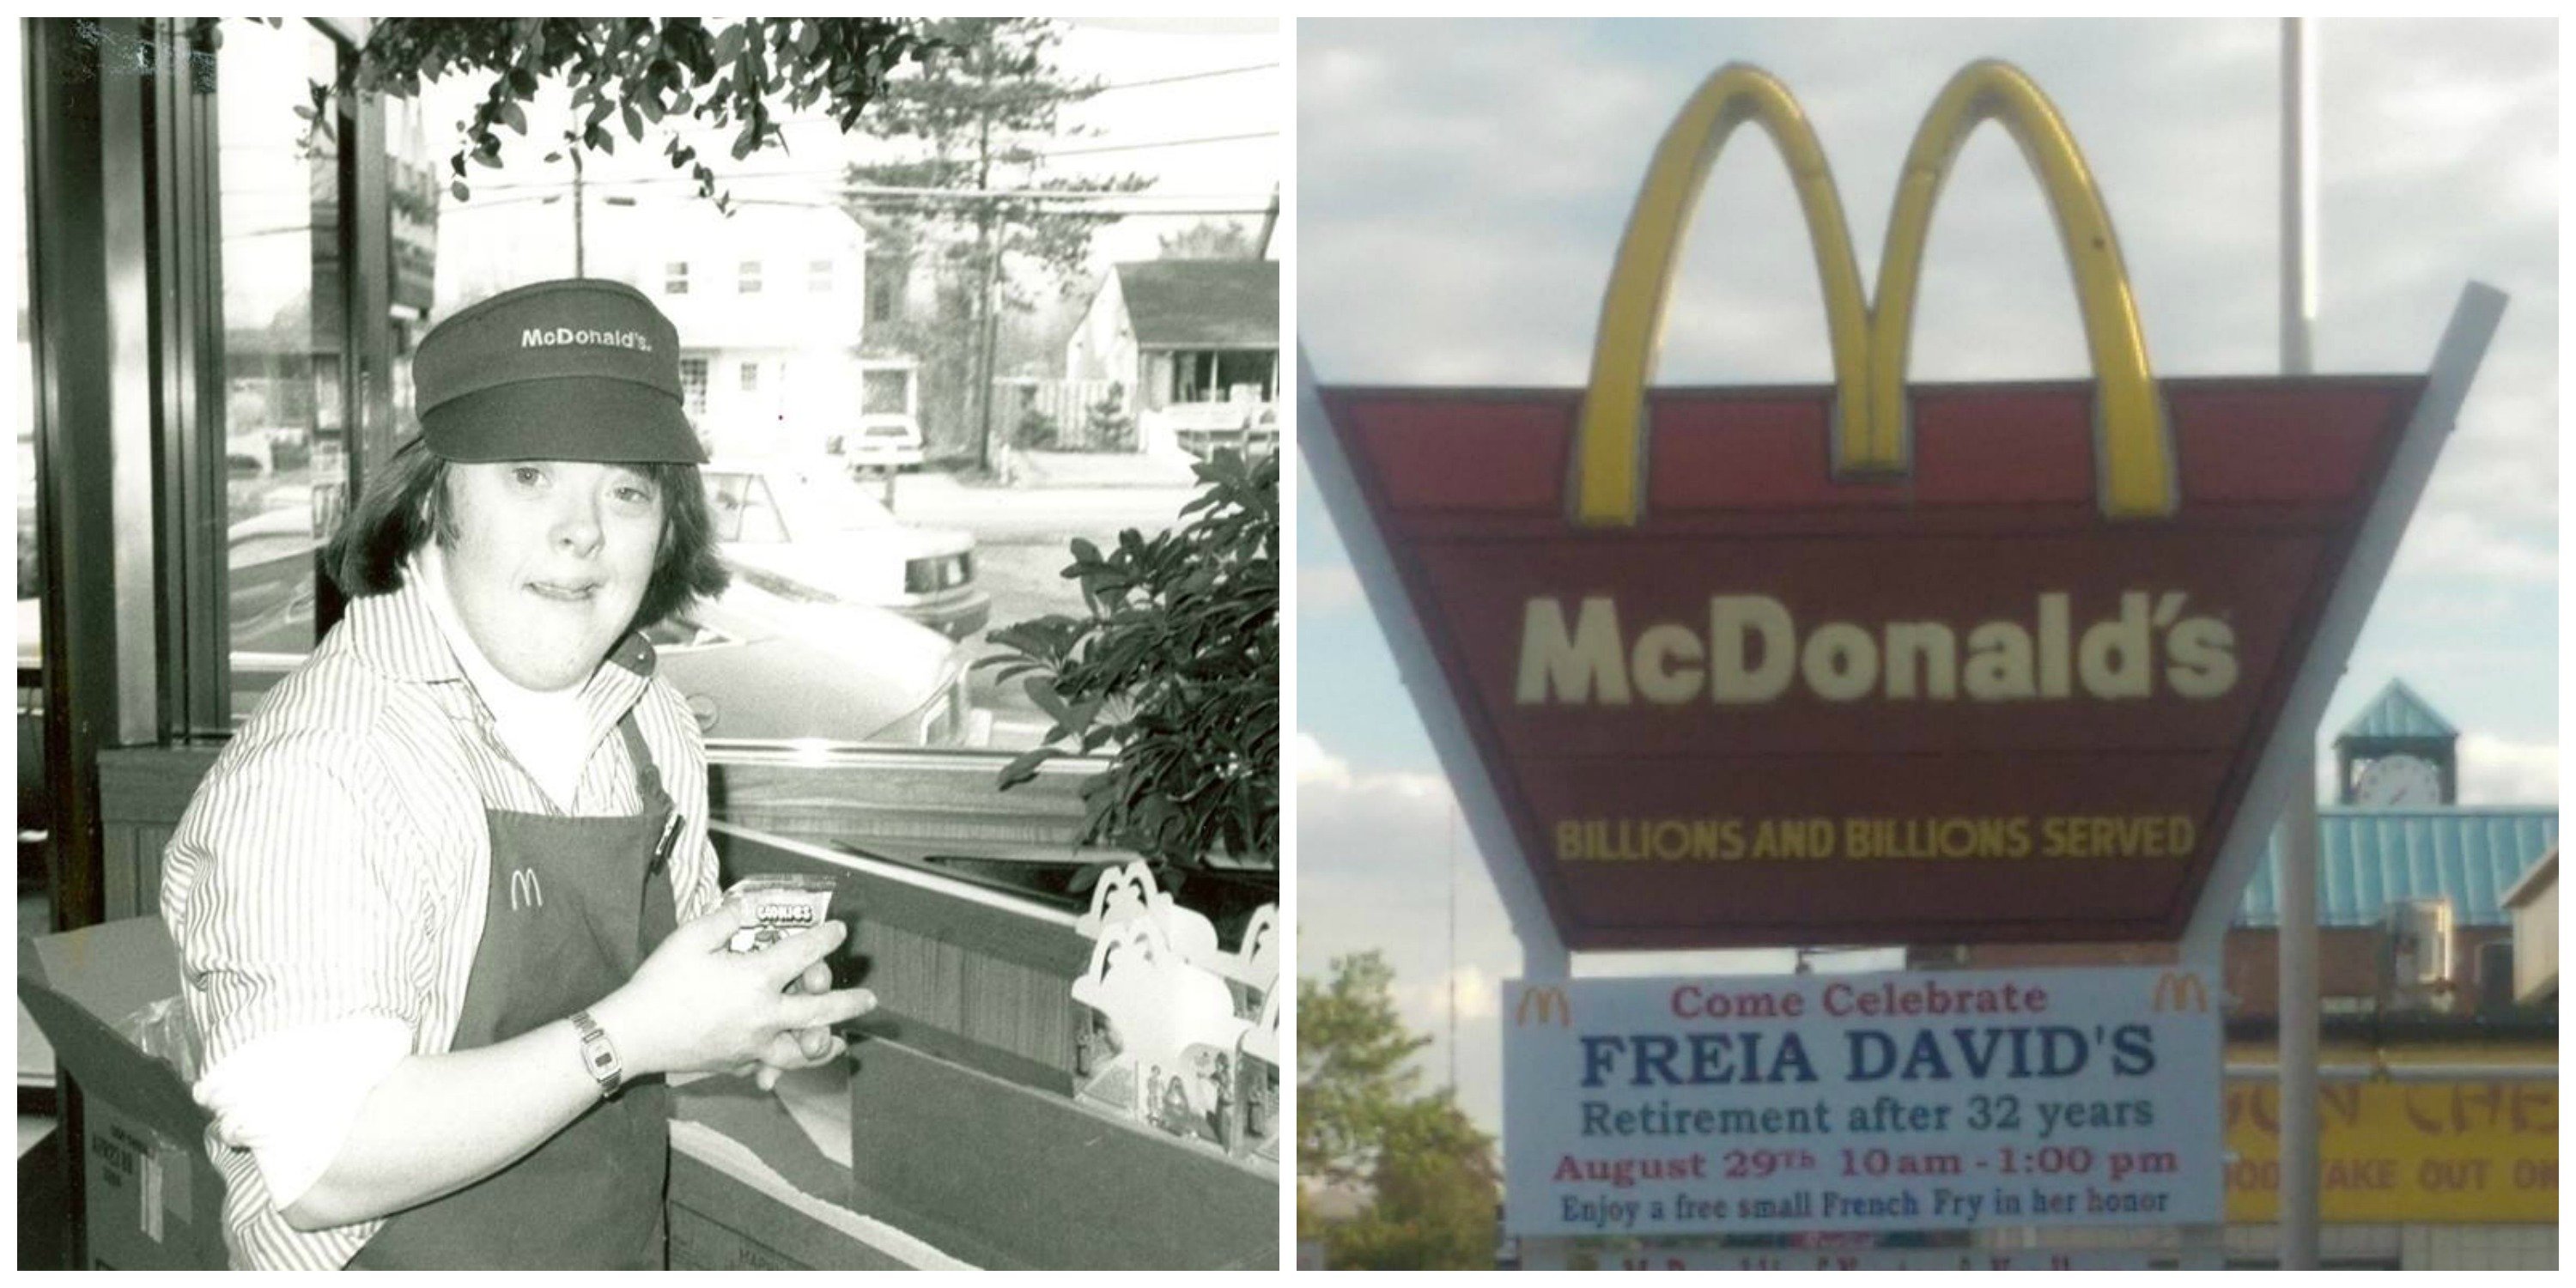 freia thumb.jpg?resize=1200,630 - After 32 Years, A Devoted McDonald's Employee Gets A Beautiful Send-Off